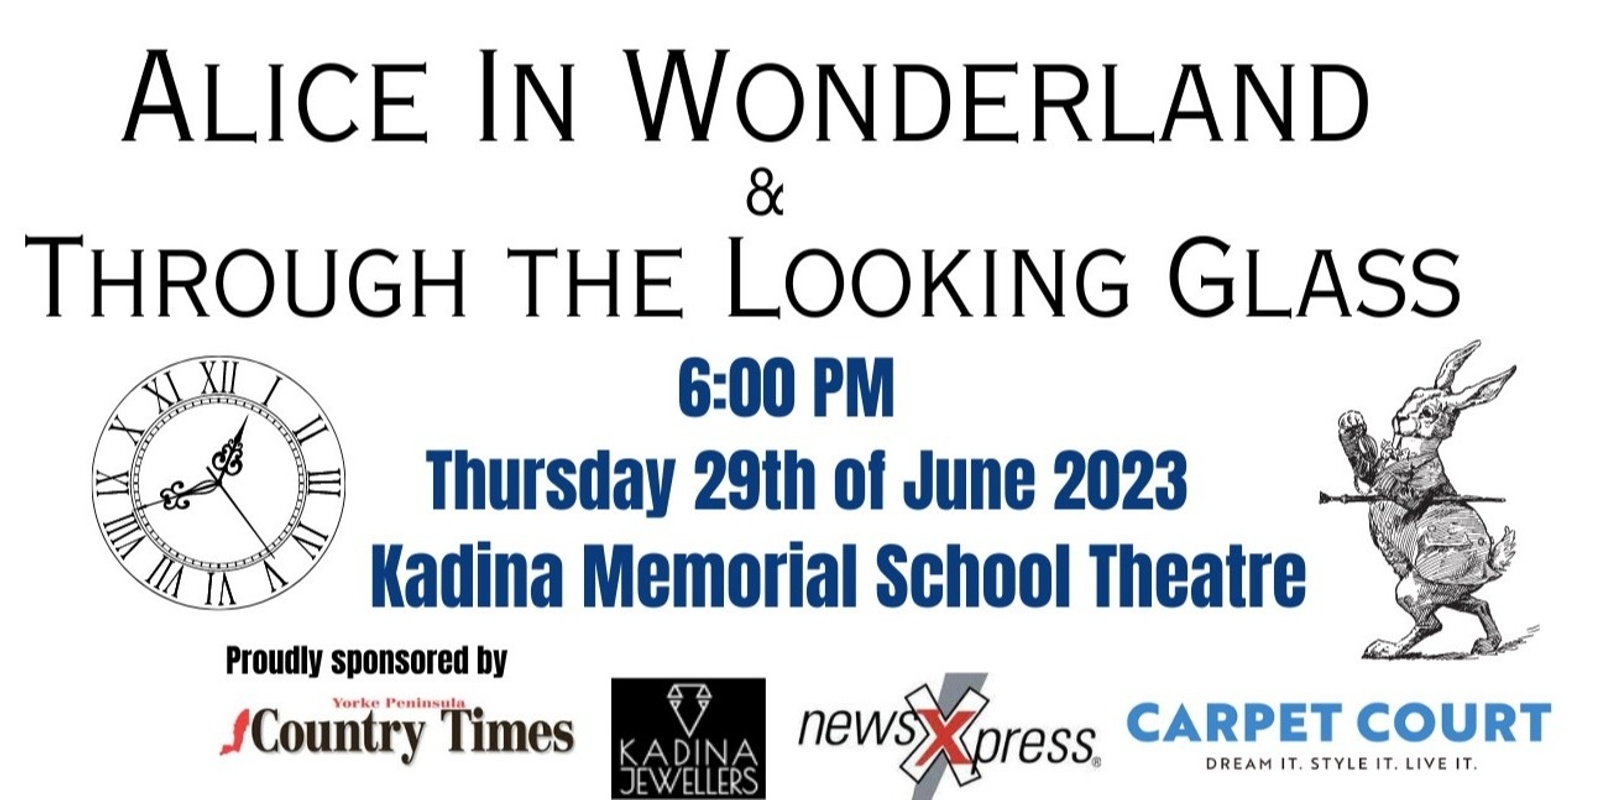 Banner image for Thursday Alice in Wonderland and Through The Looking Glass